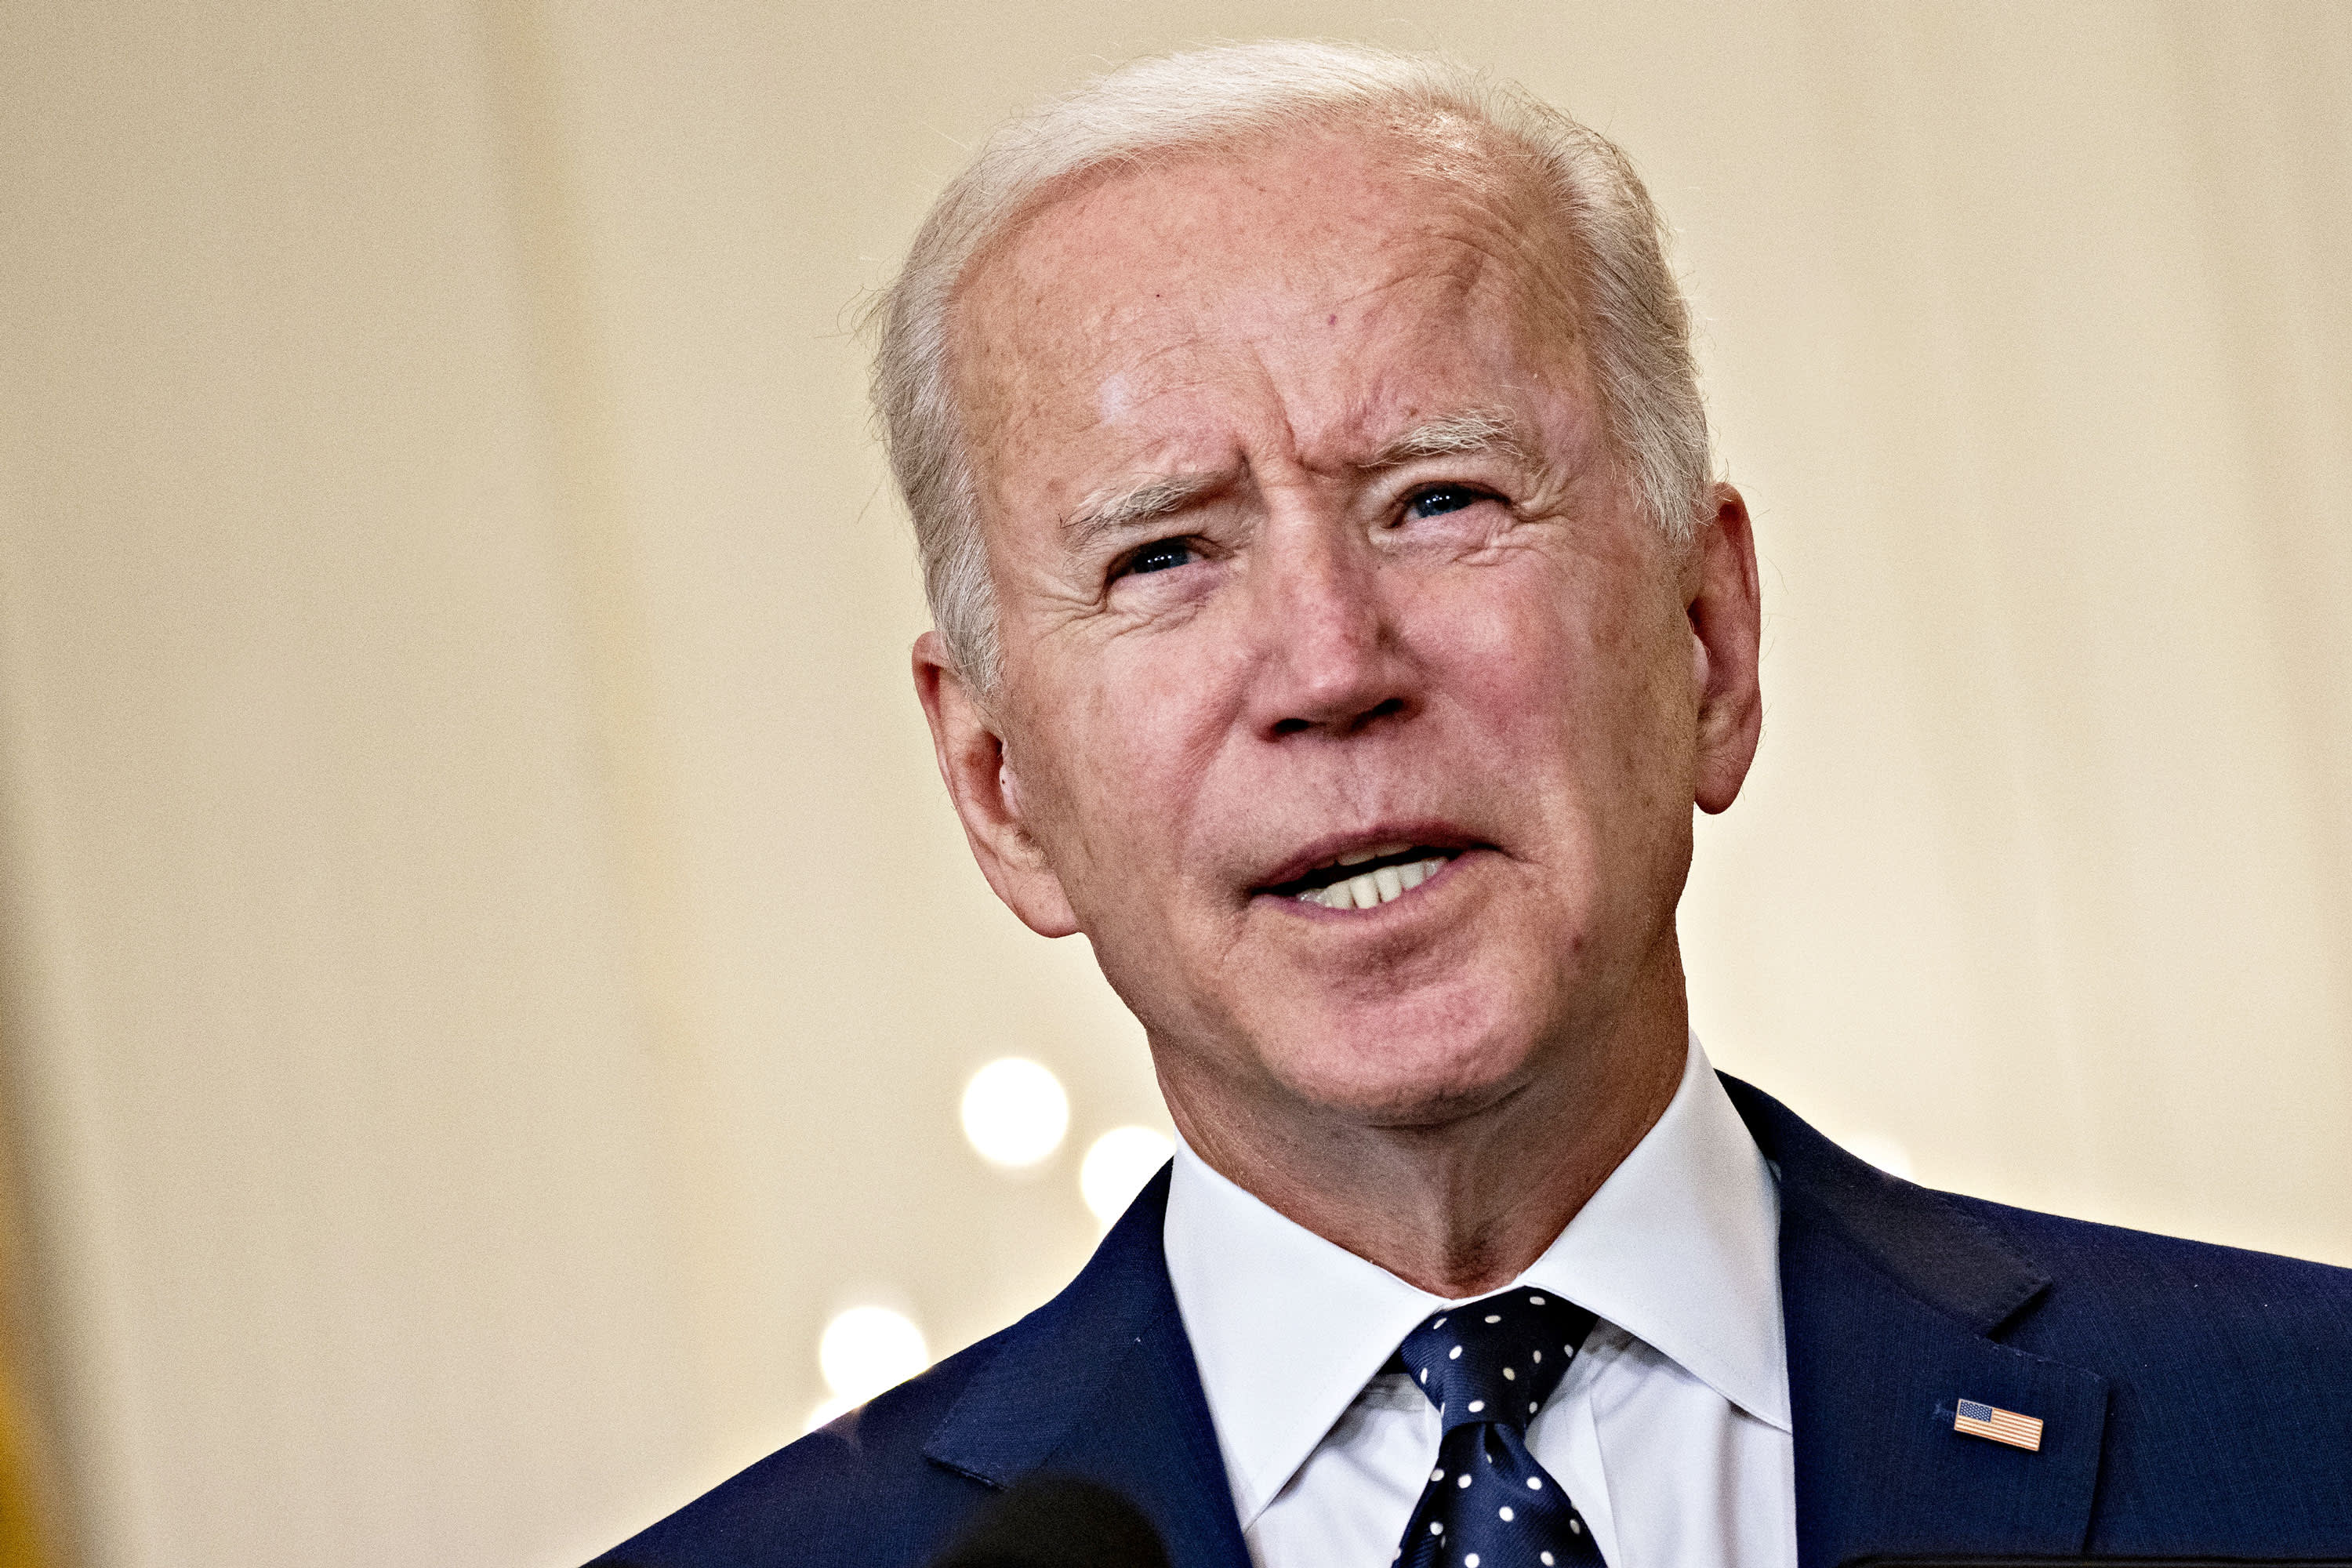 Biden's recovery plan for families set to cost more than $1 trillion, extend enhanced child tax credit